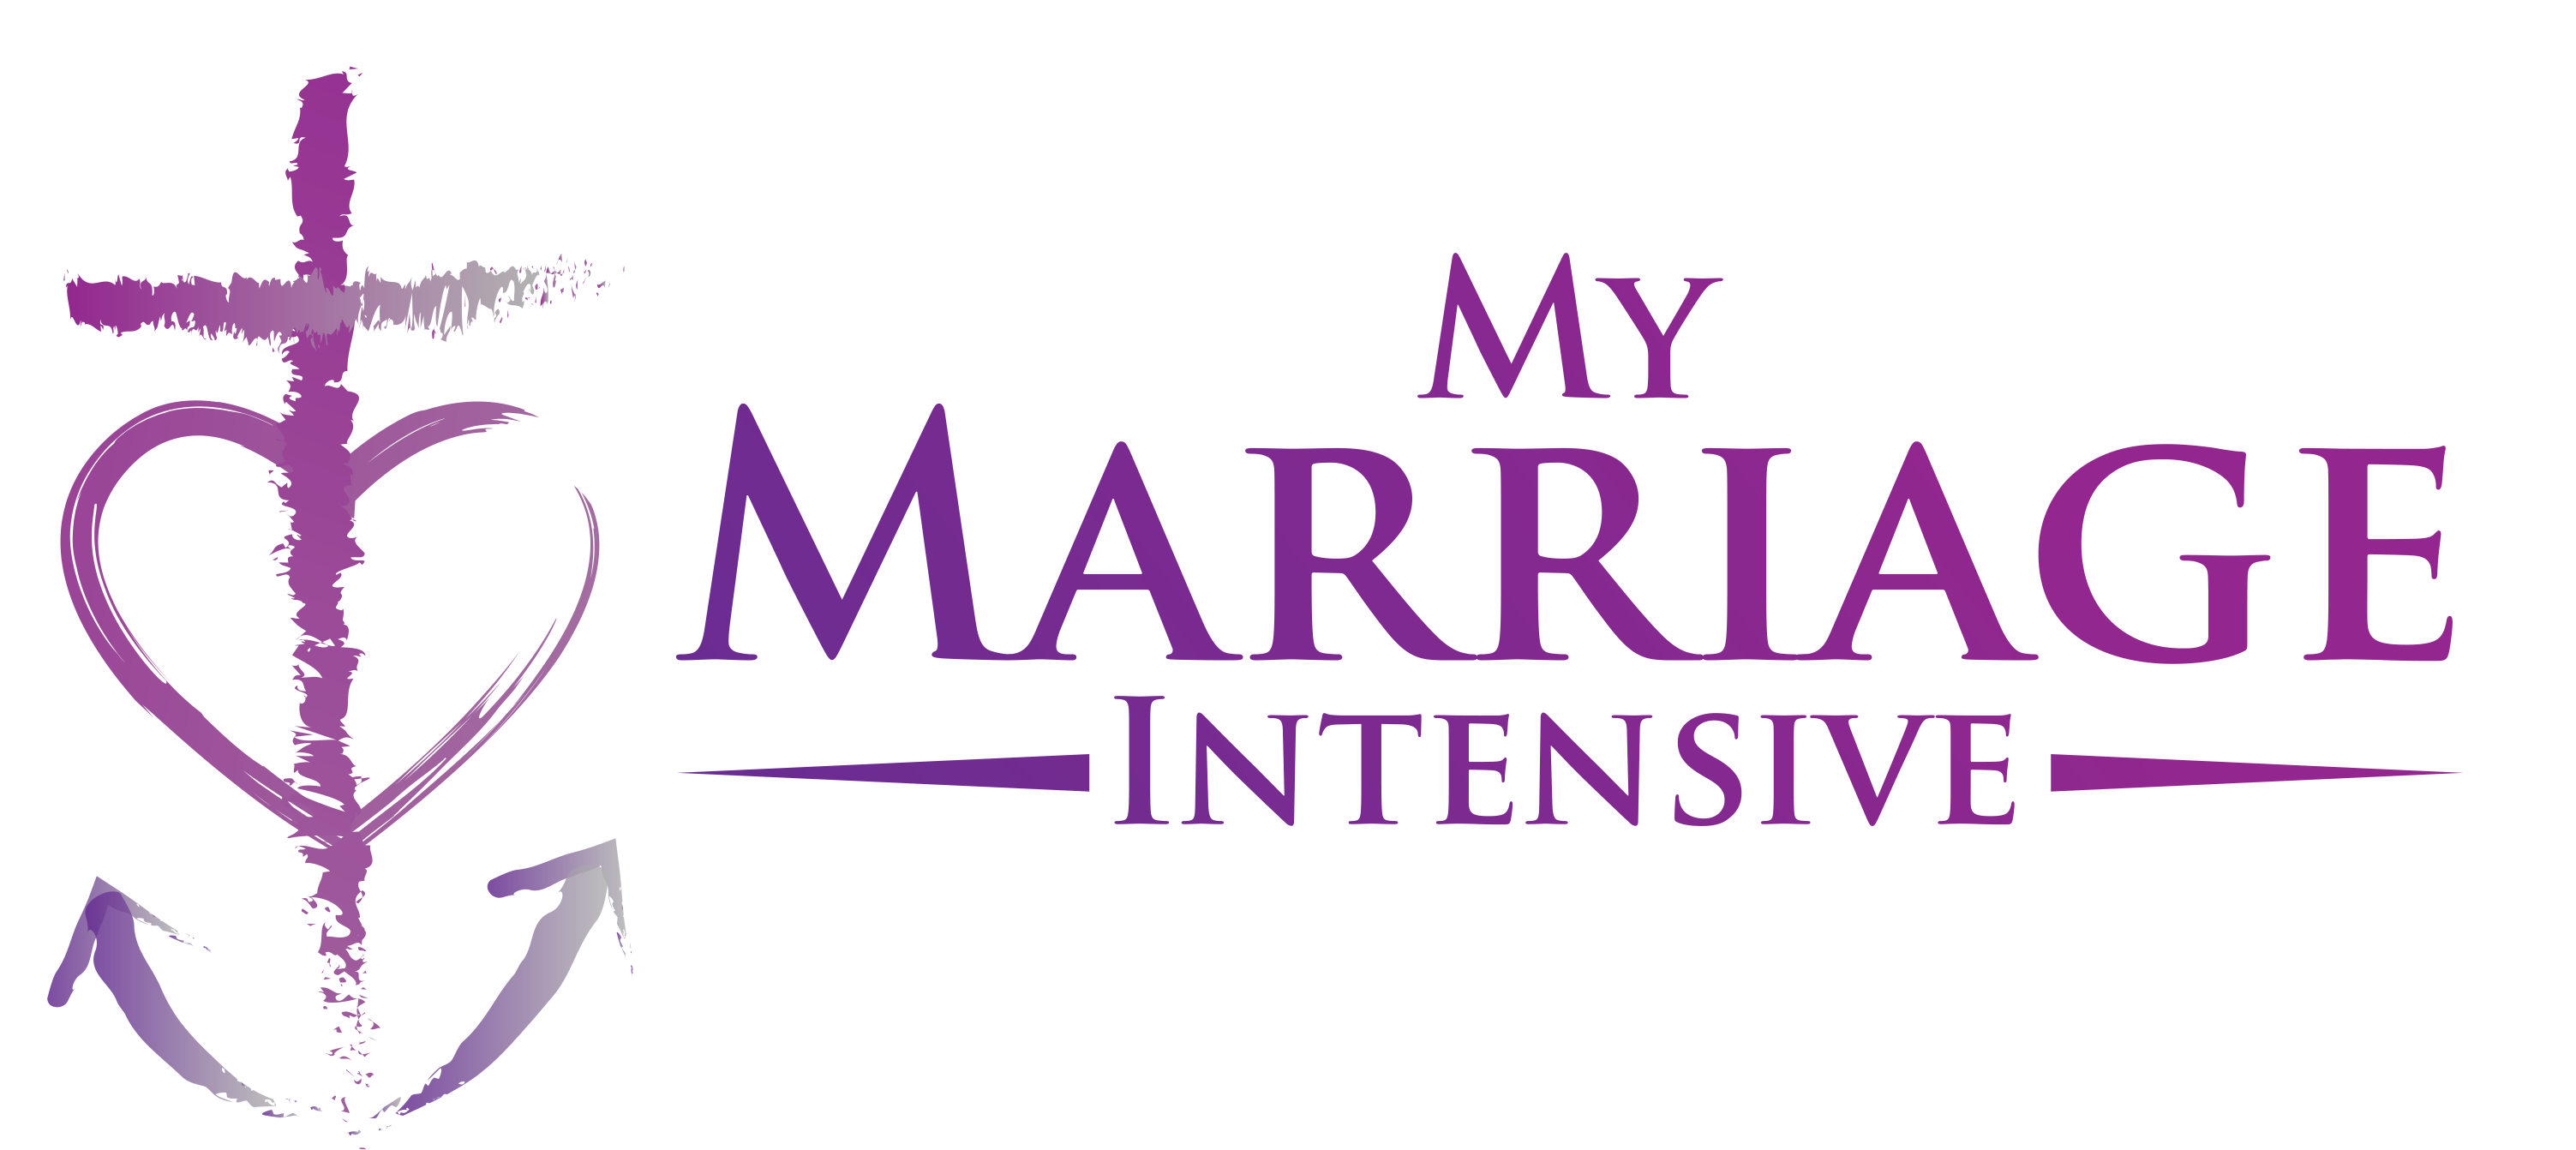 Christian Marriage Intensive Counseling